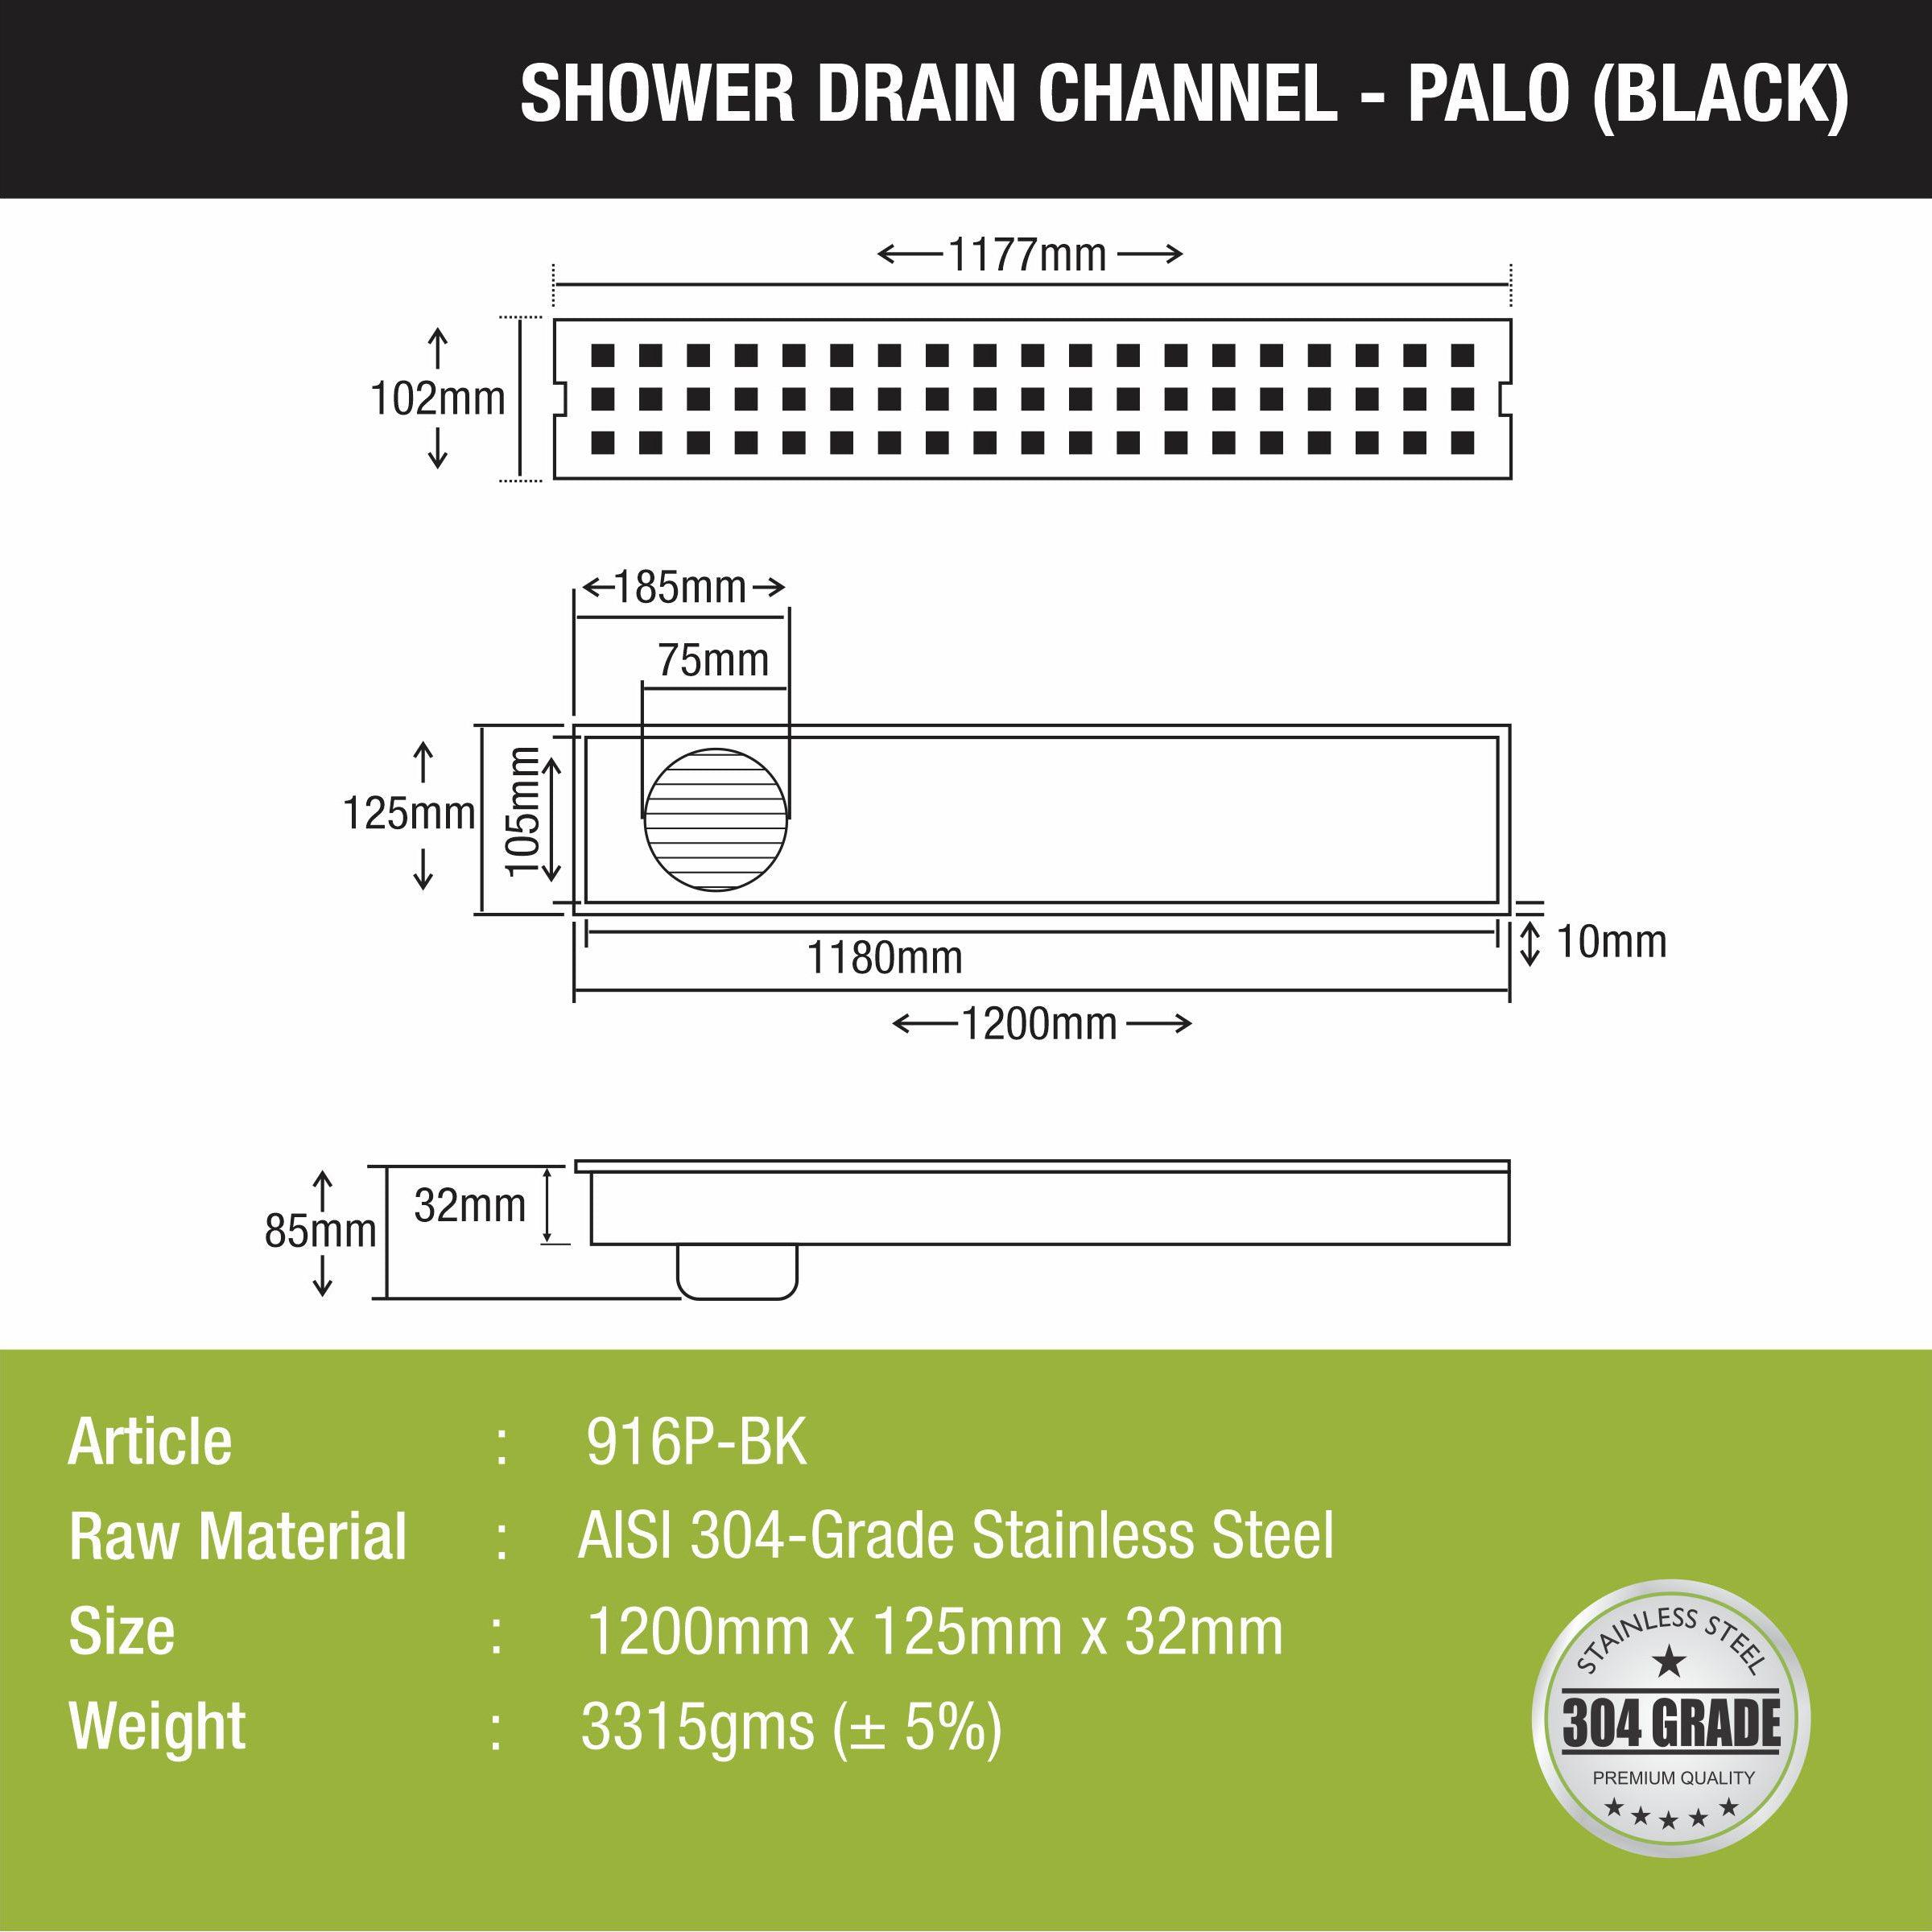 Palo Shower Drain Channel - Black (48 x 5 Inches) size and development